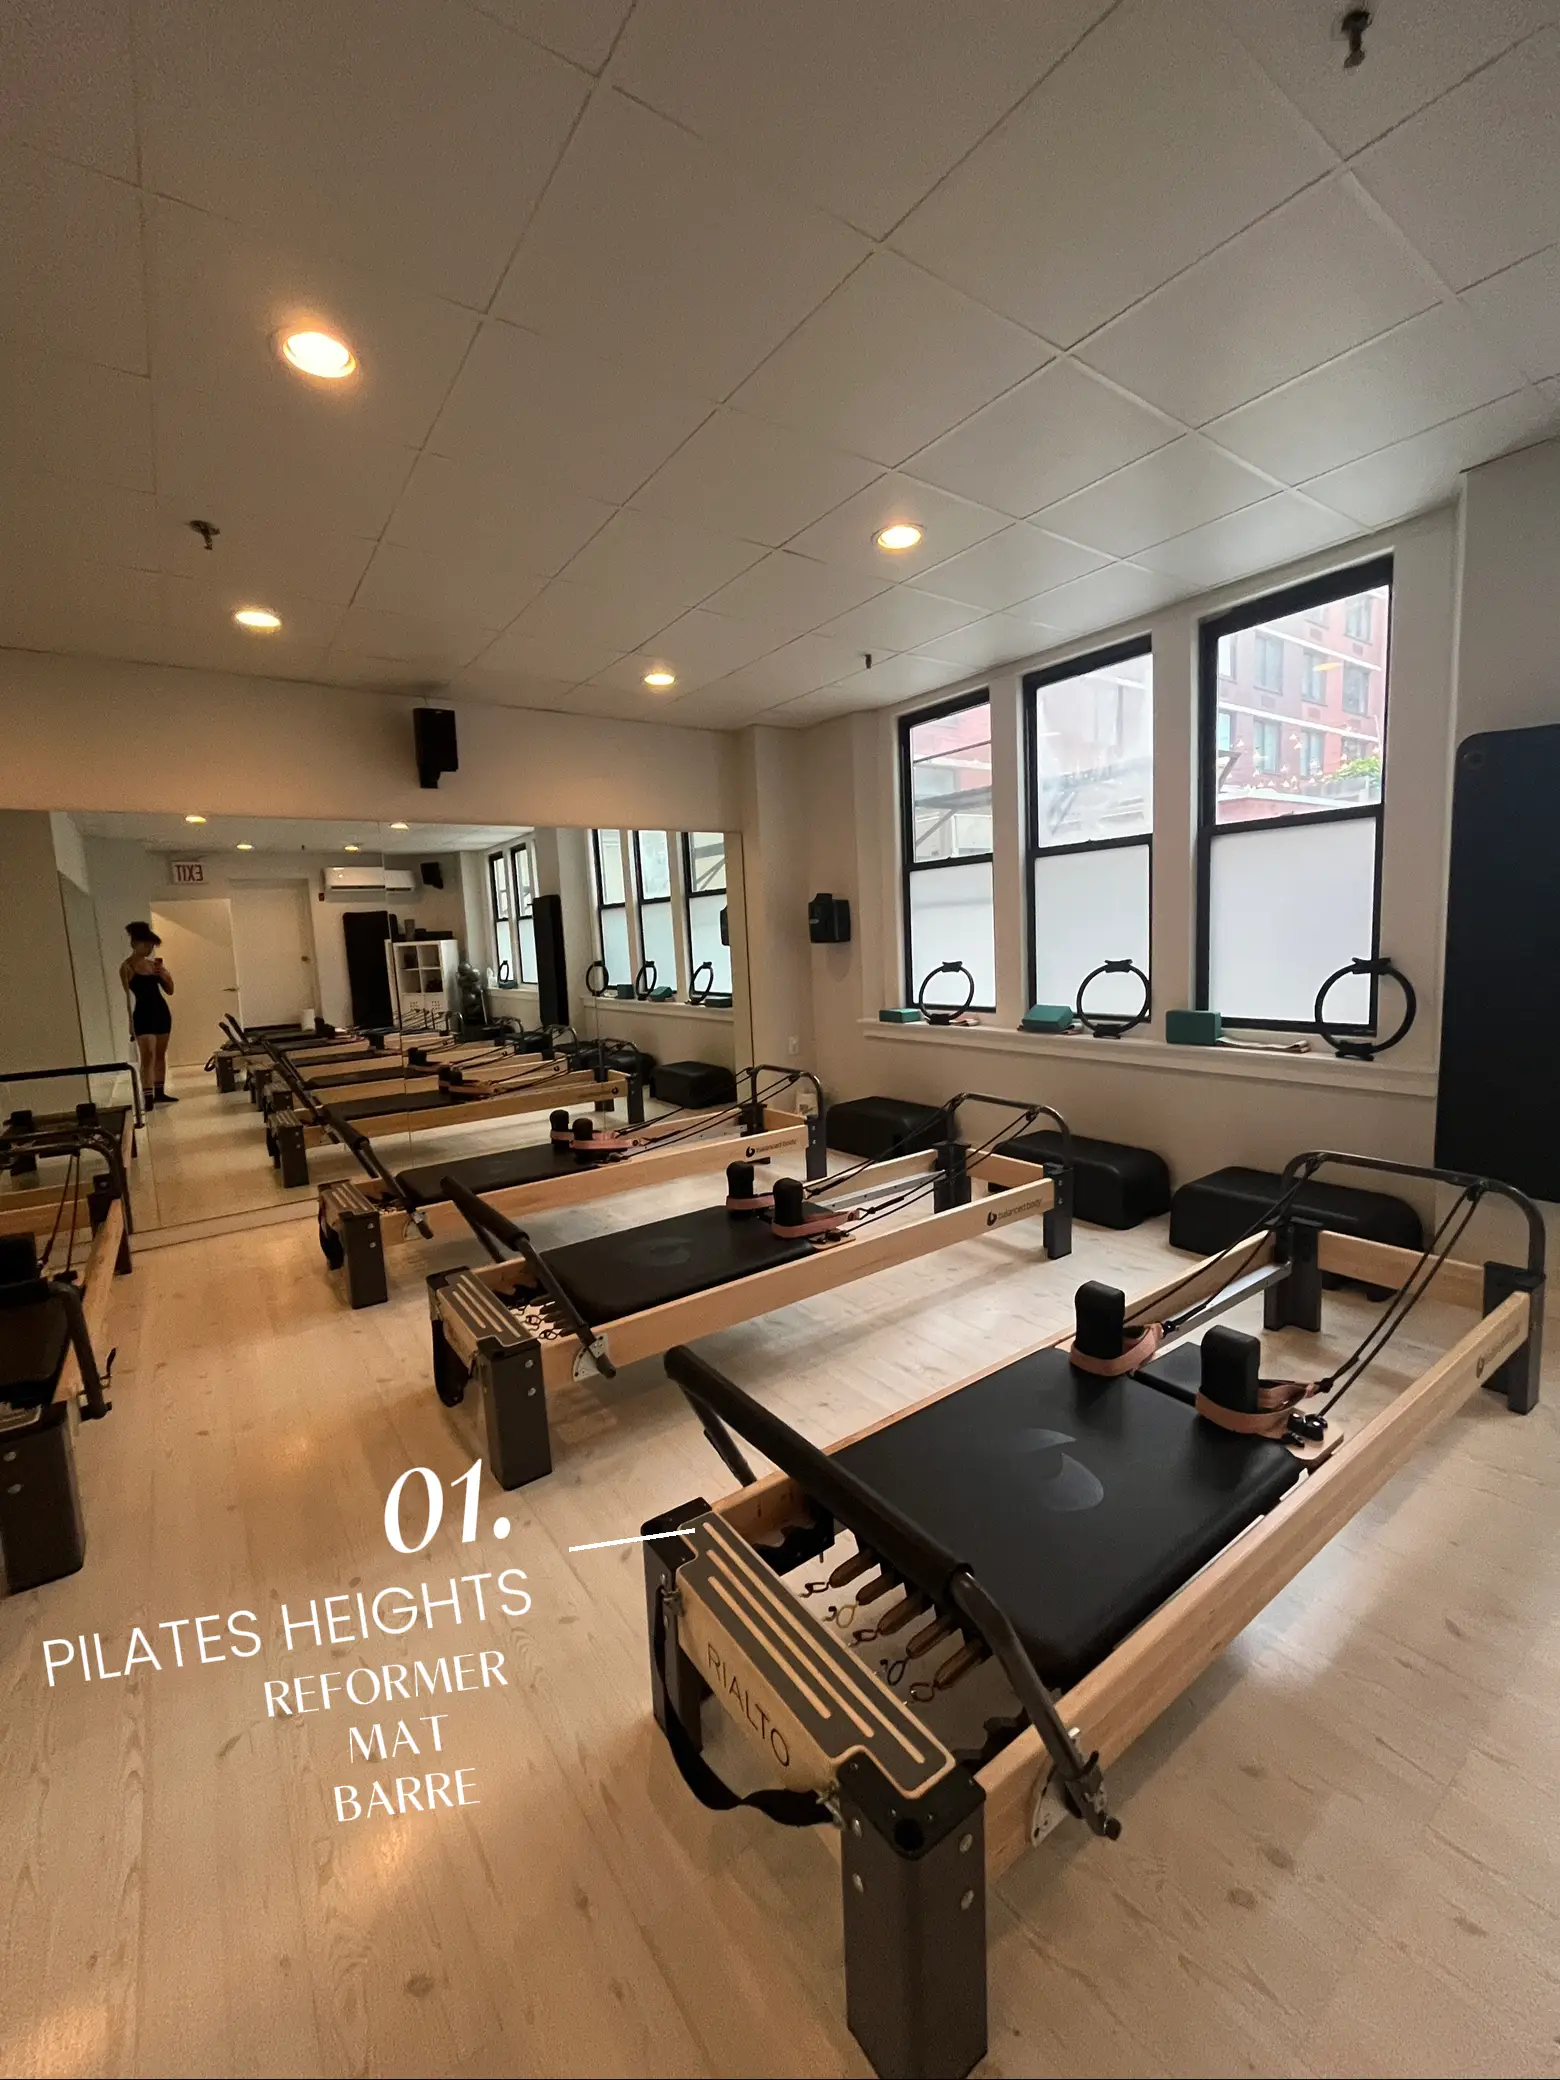 Avea Pilates. – Highly Rated Reformer Studios with multiple NYC locations